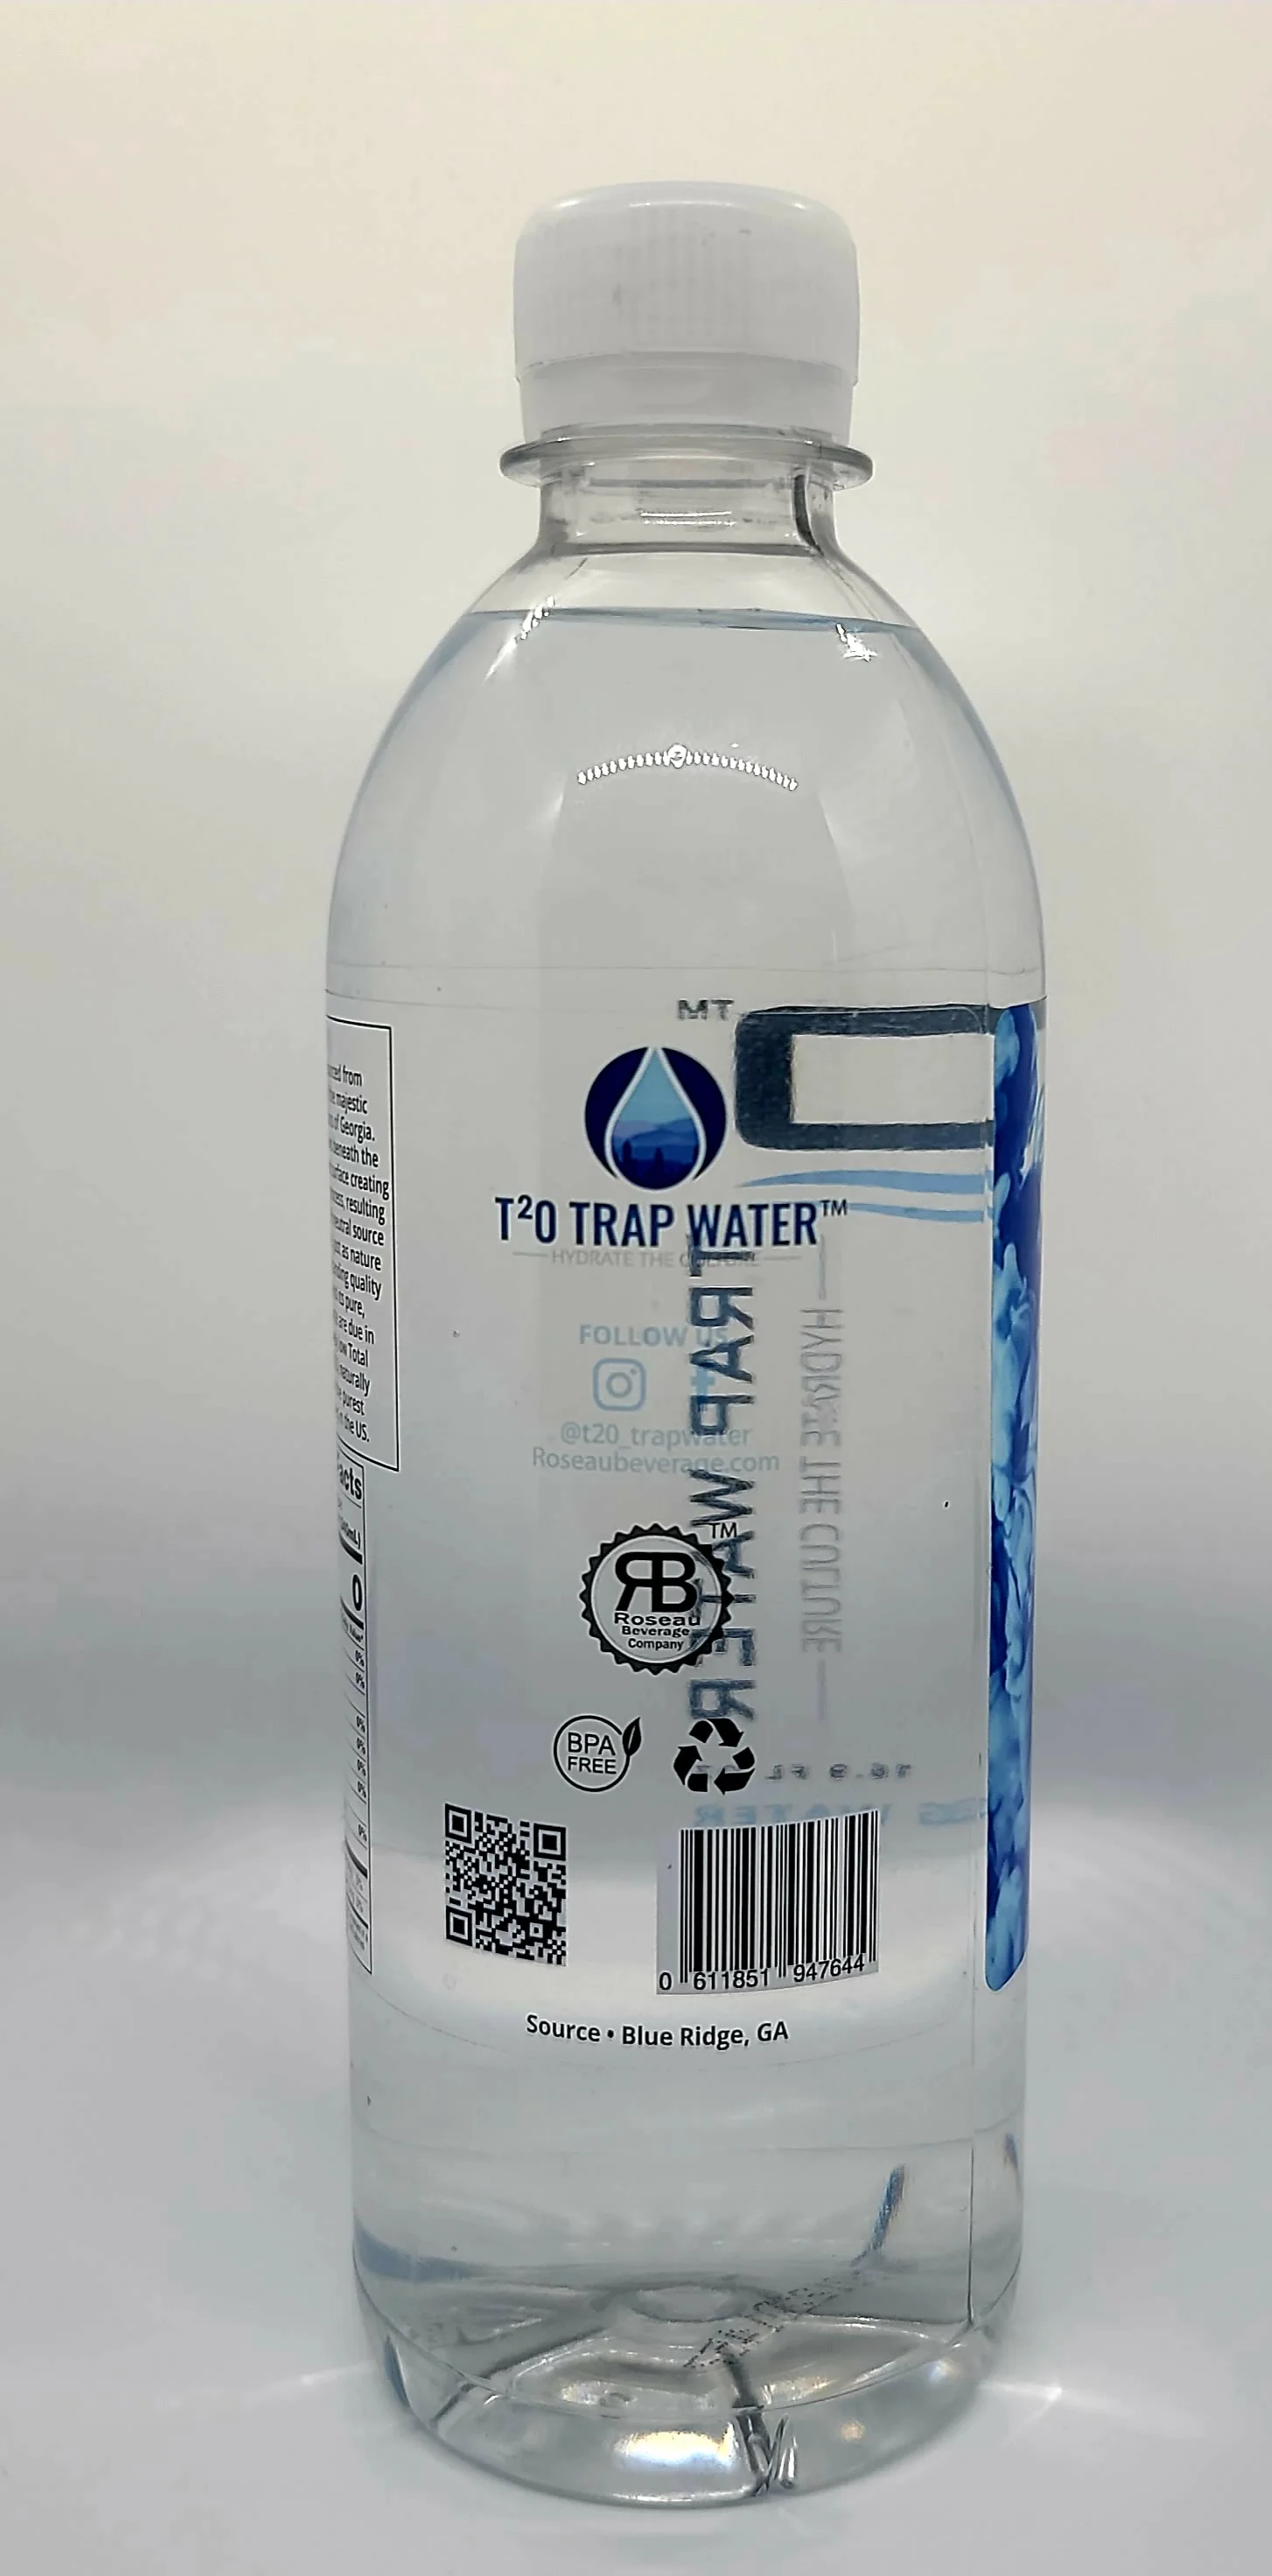 
Unique Pure Refreshing T20 Trap Water 16.9 FL OZ & 20 FL OZ 100% ALL Natural Spring Water 